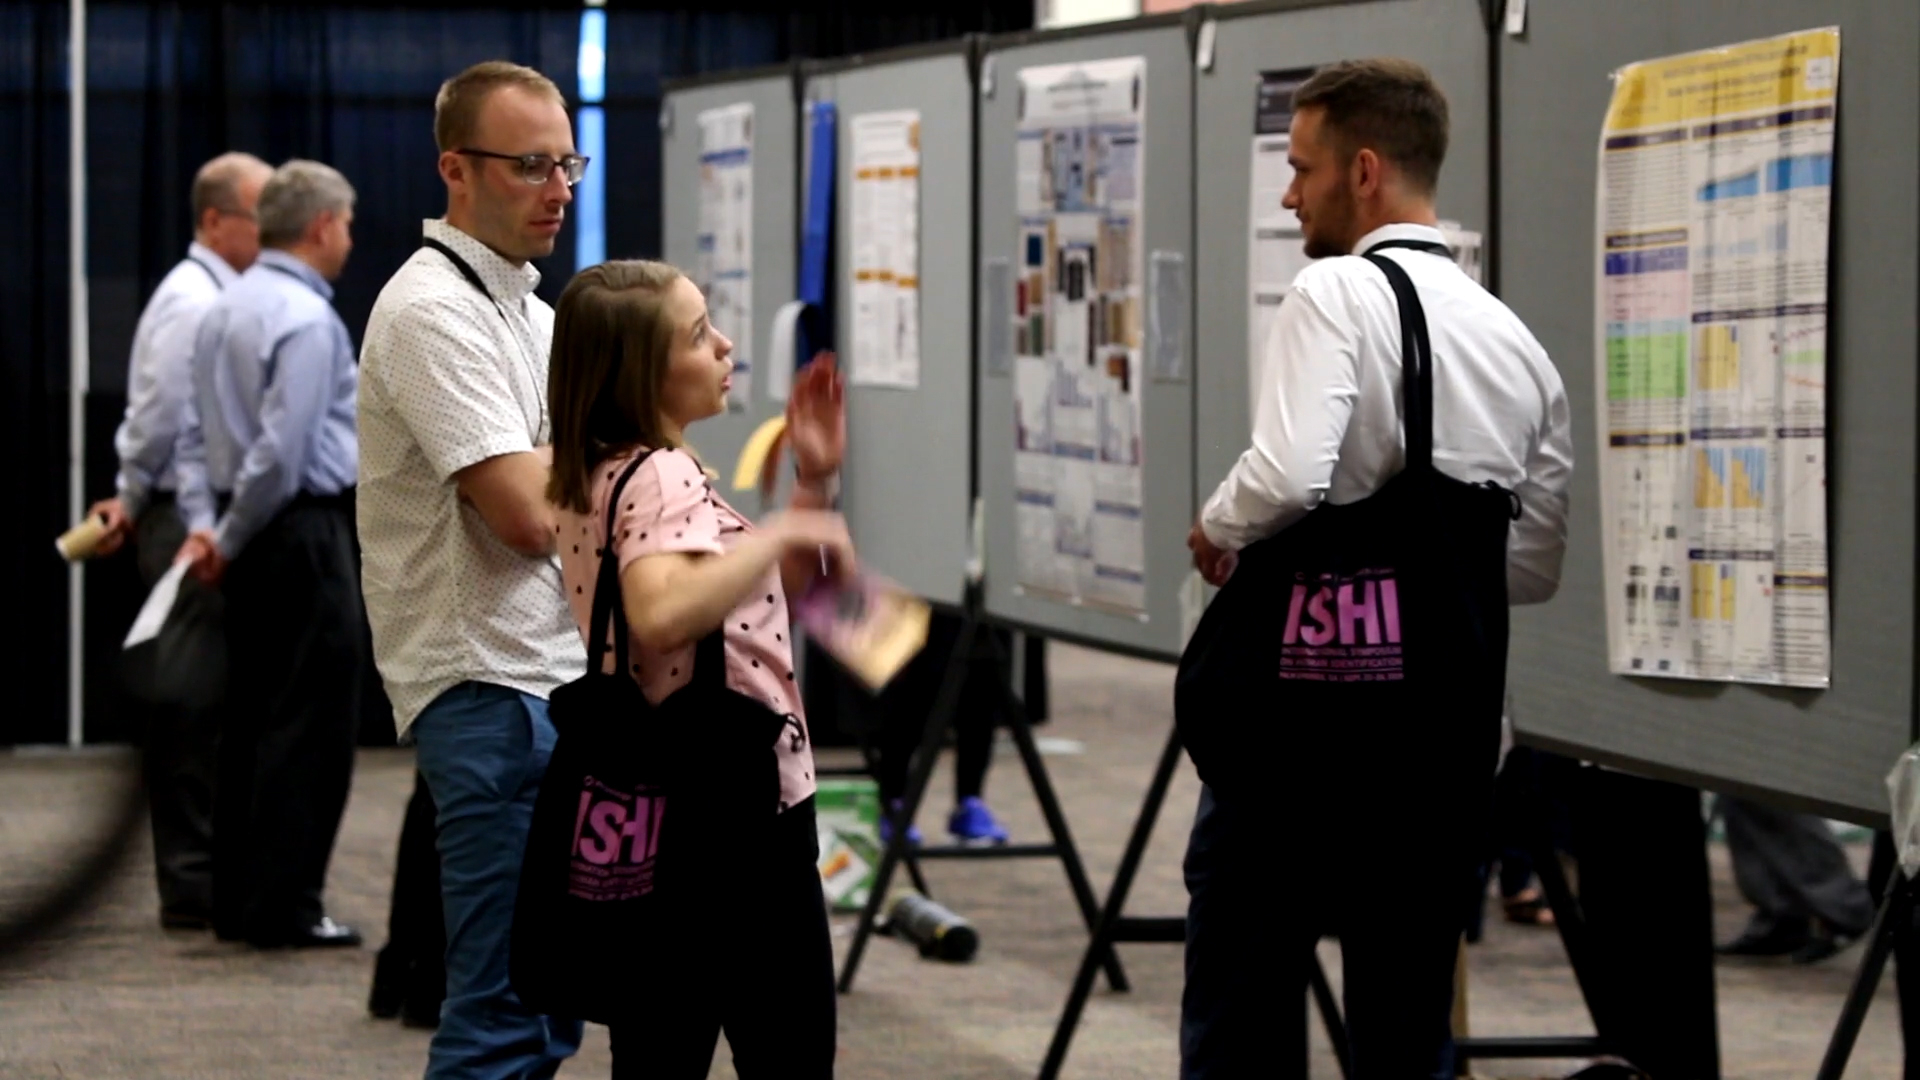 The International Symposium on Human Identification (ISHI) is the largest annual meeting focusing entirely on DNA forensics.